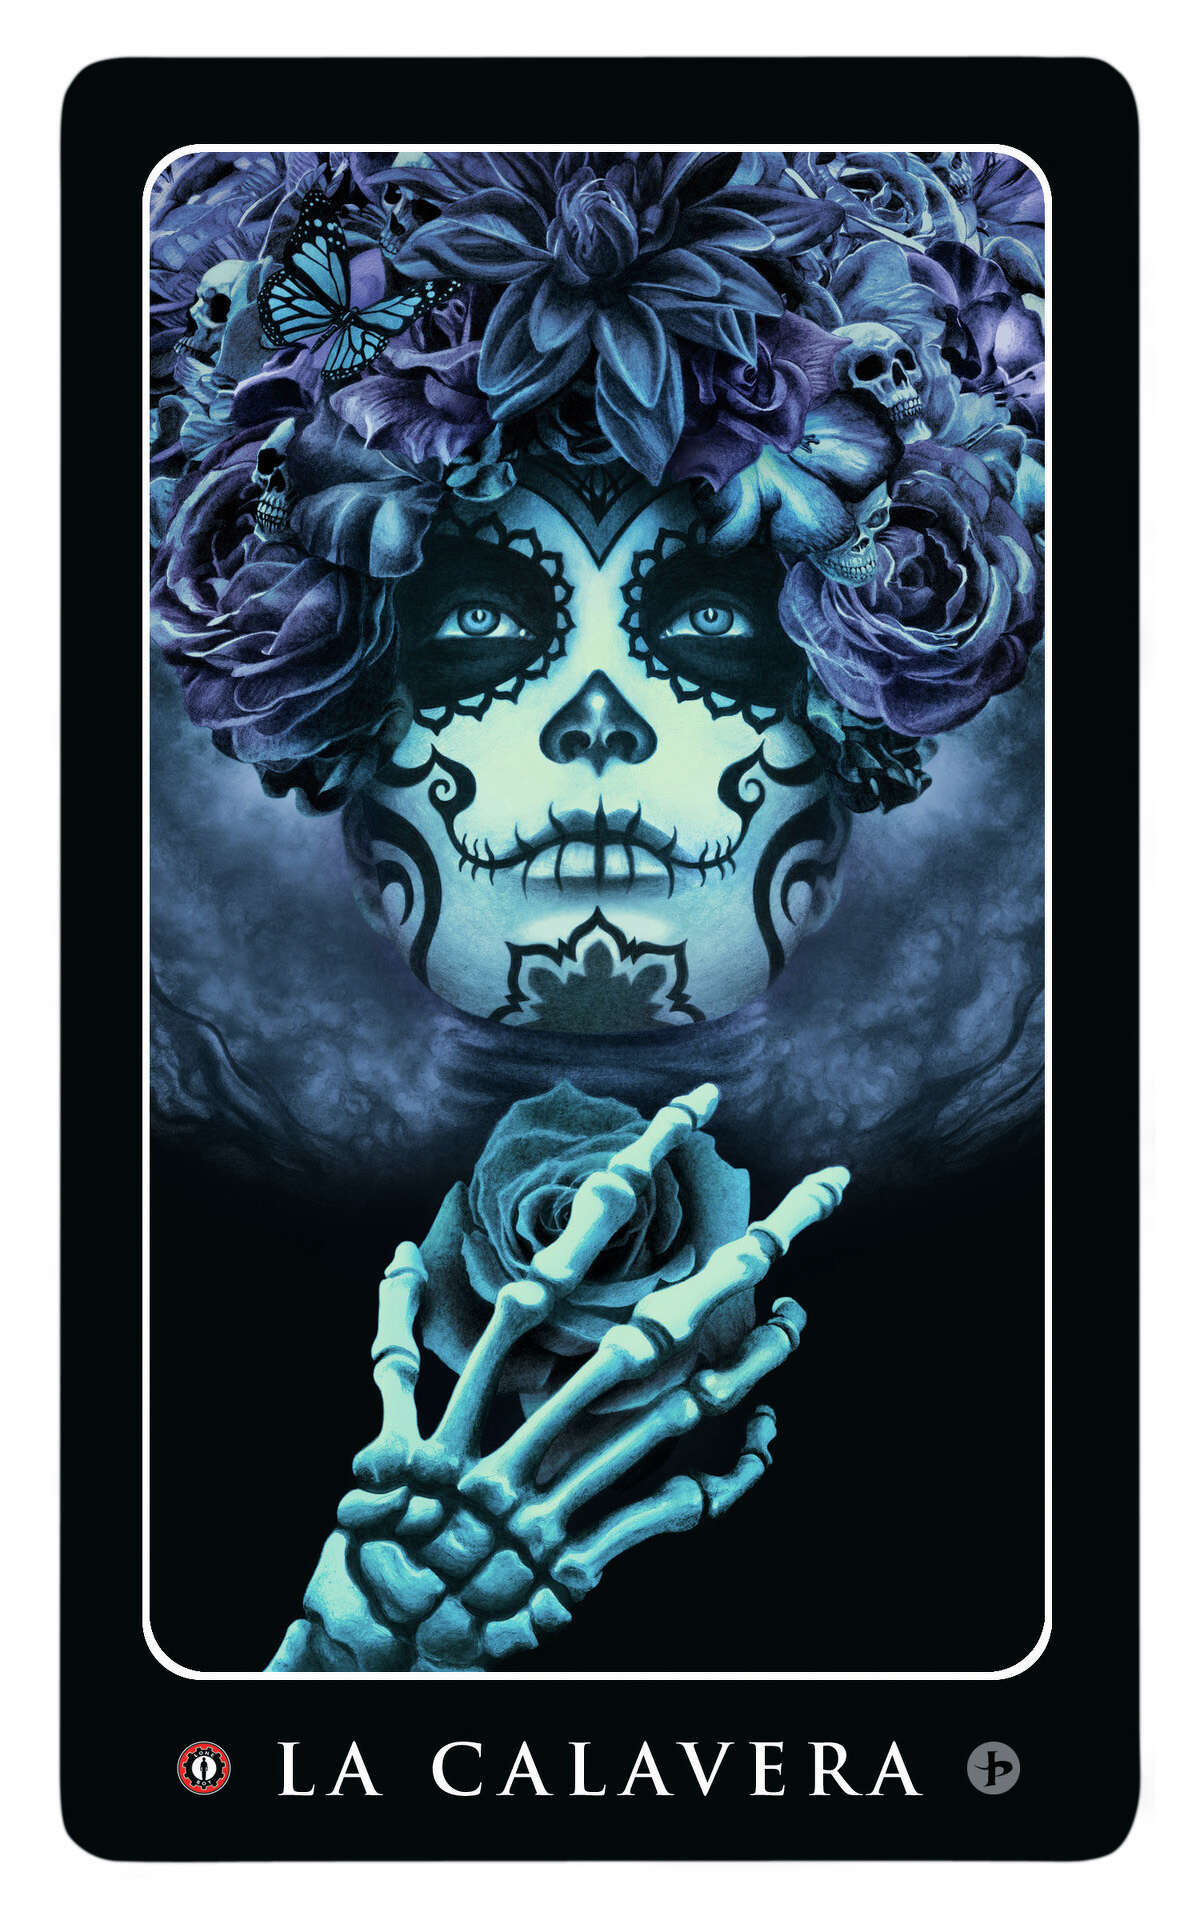 Picacio plans to illustrate all 54 icons of lotería, such as “La Calavera” (“The Skull,” pictured).